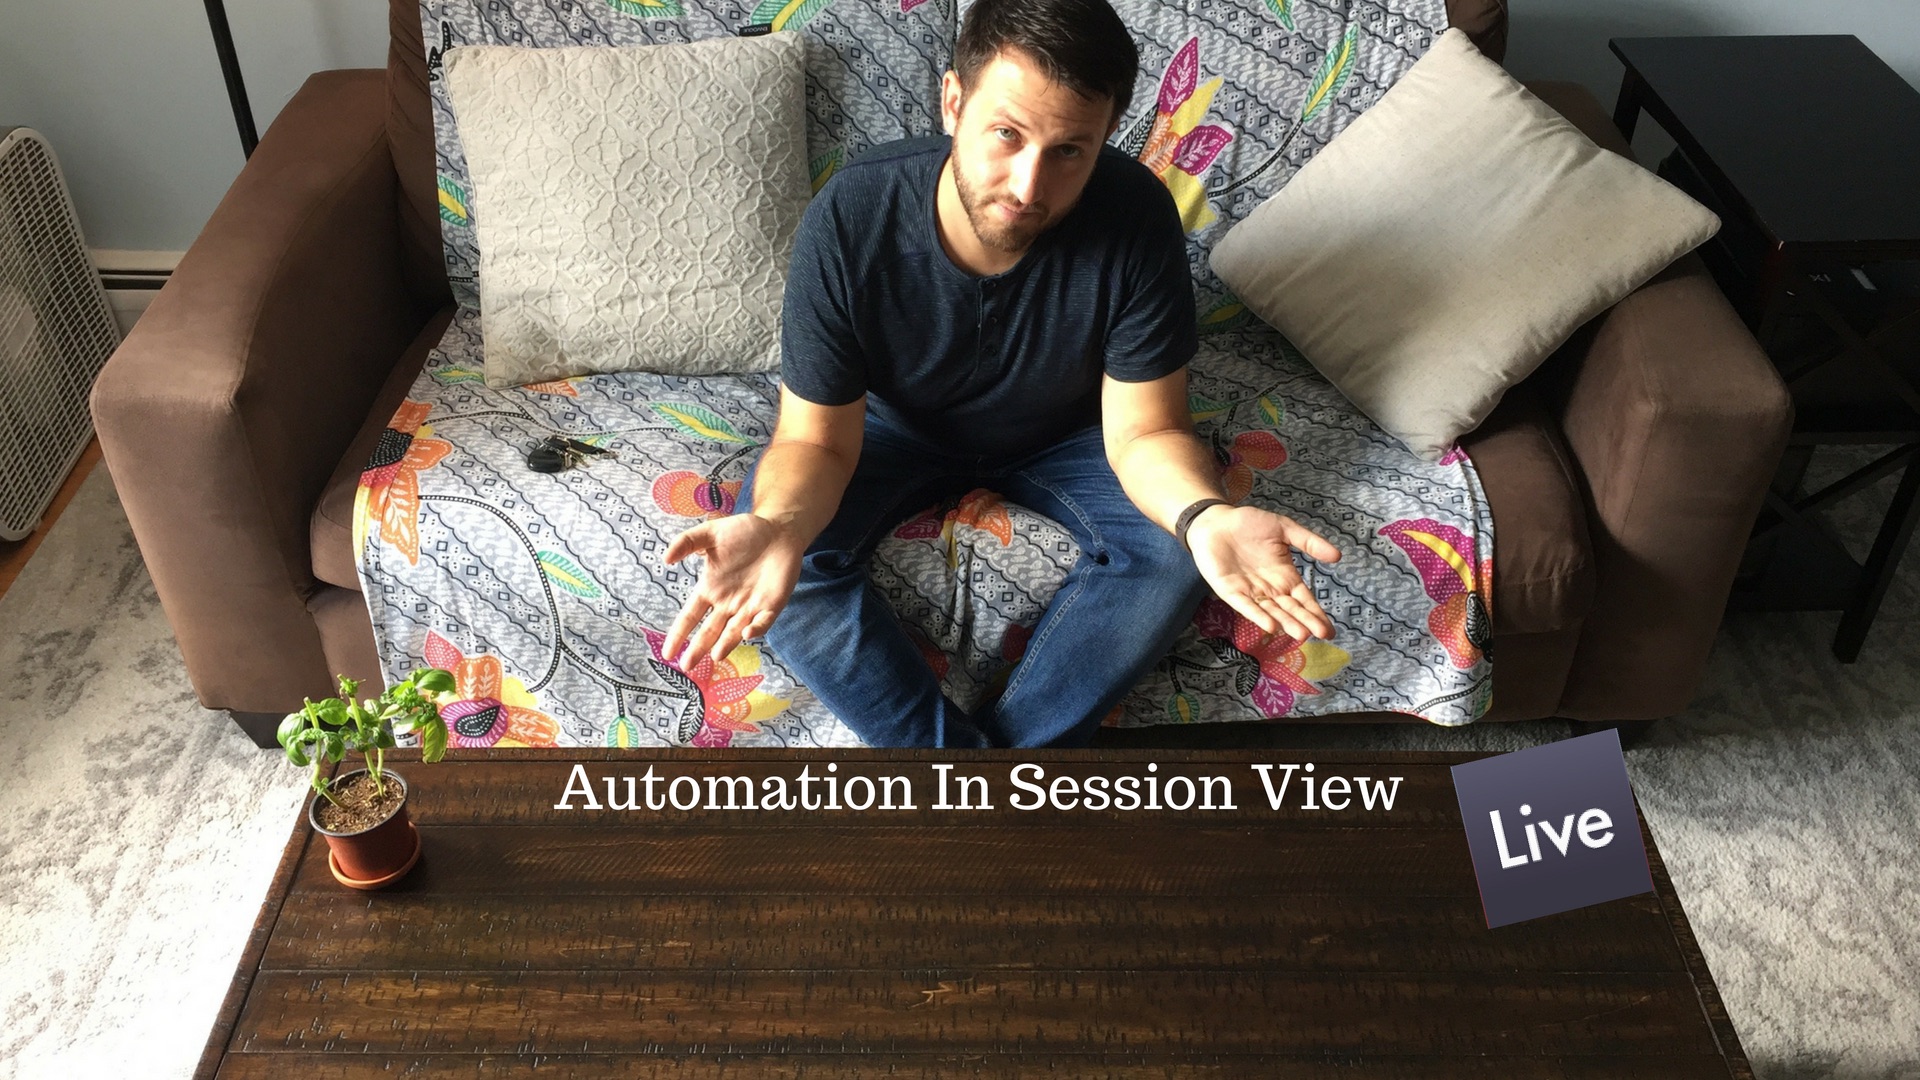 Using Automation In Session View